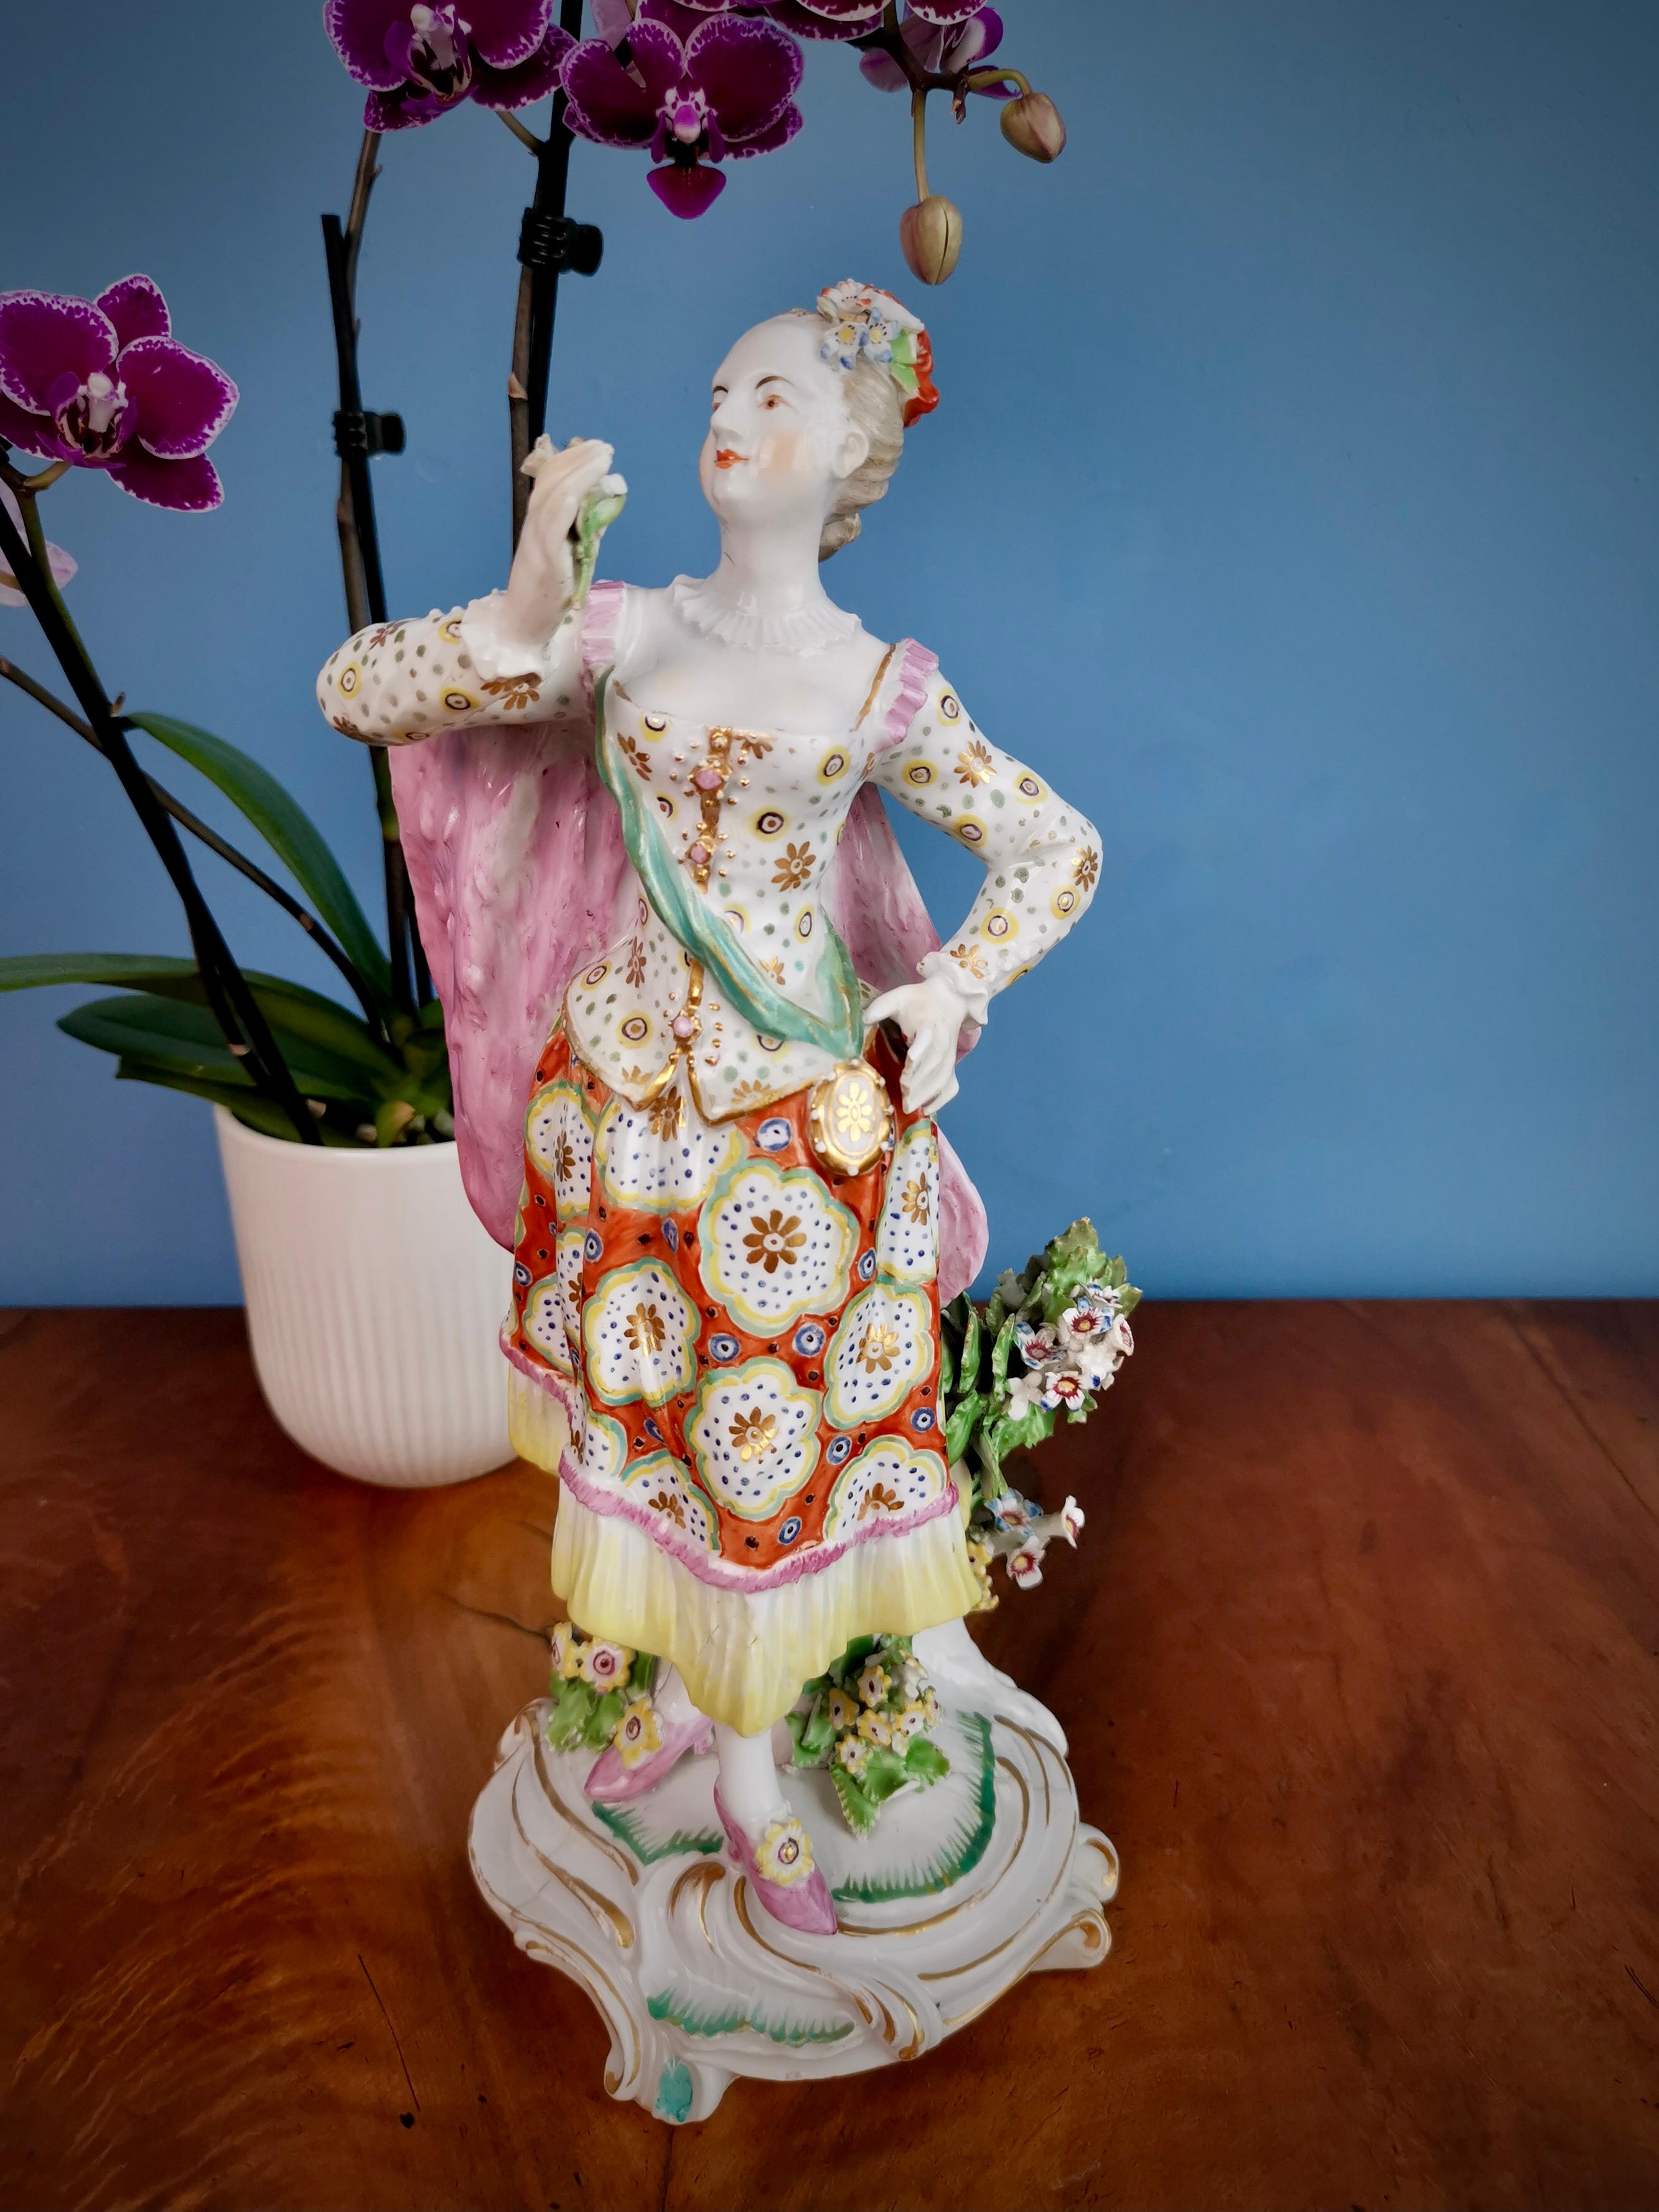 This is a sublimely made porcelain figure of the female 